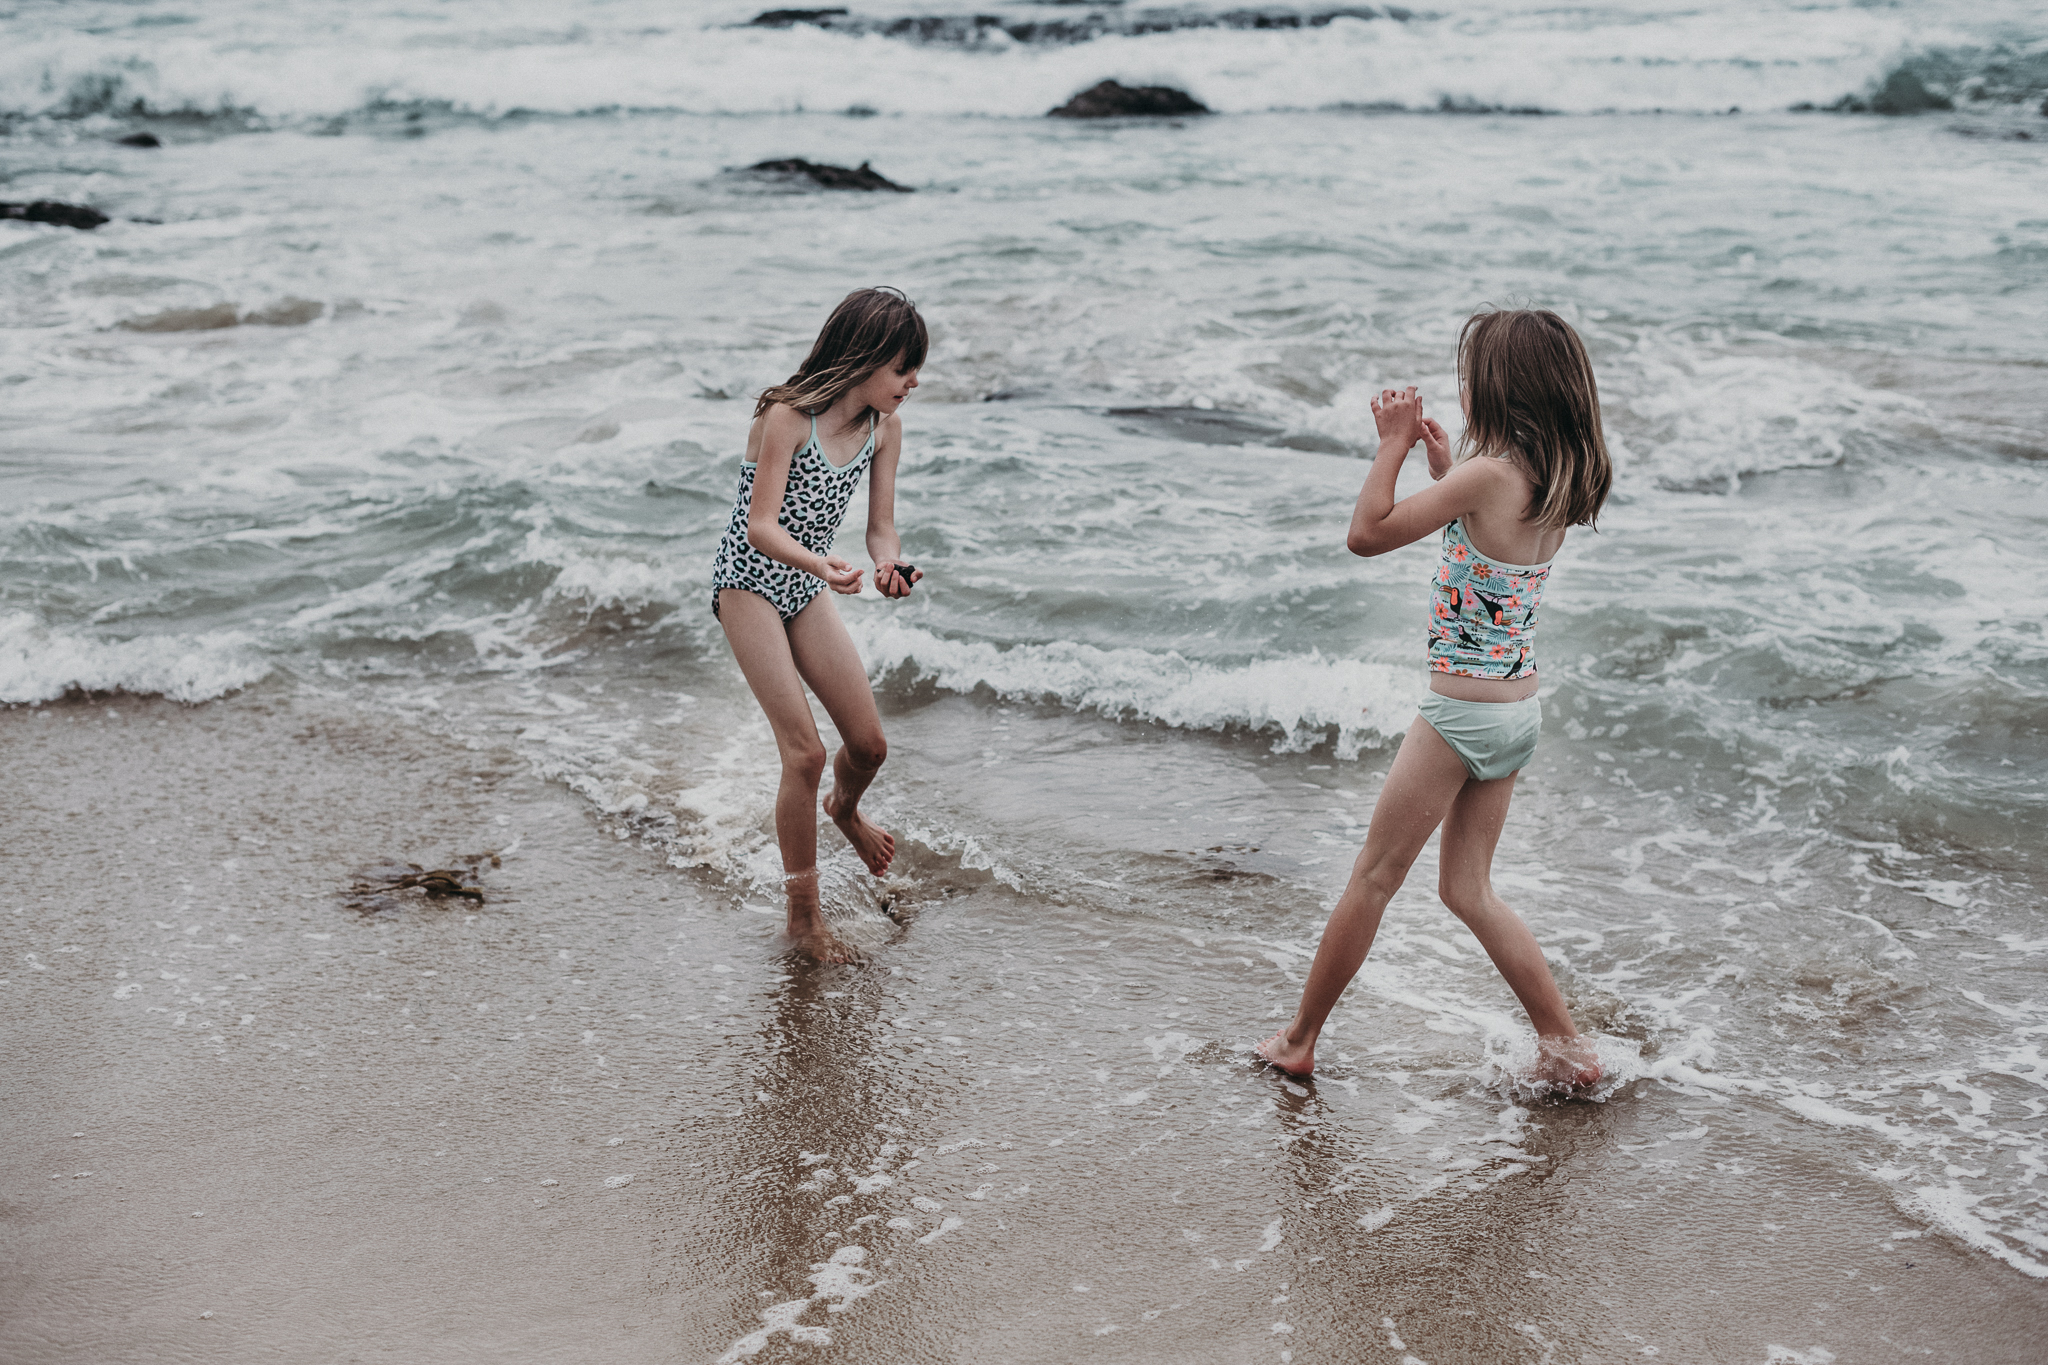 Young girls playing in shallow water